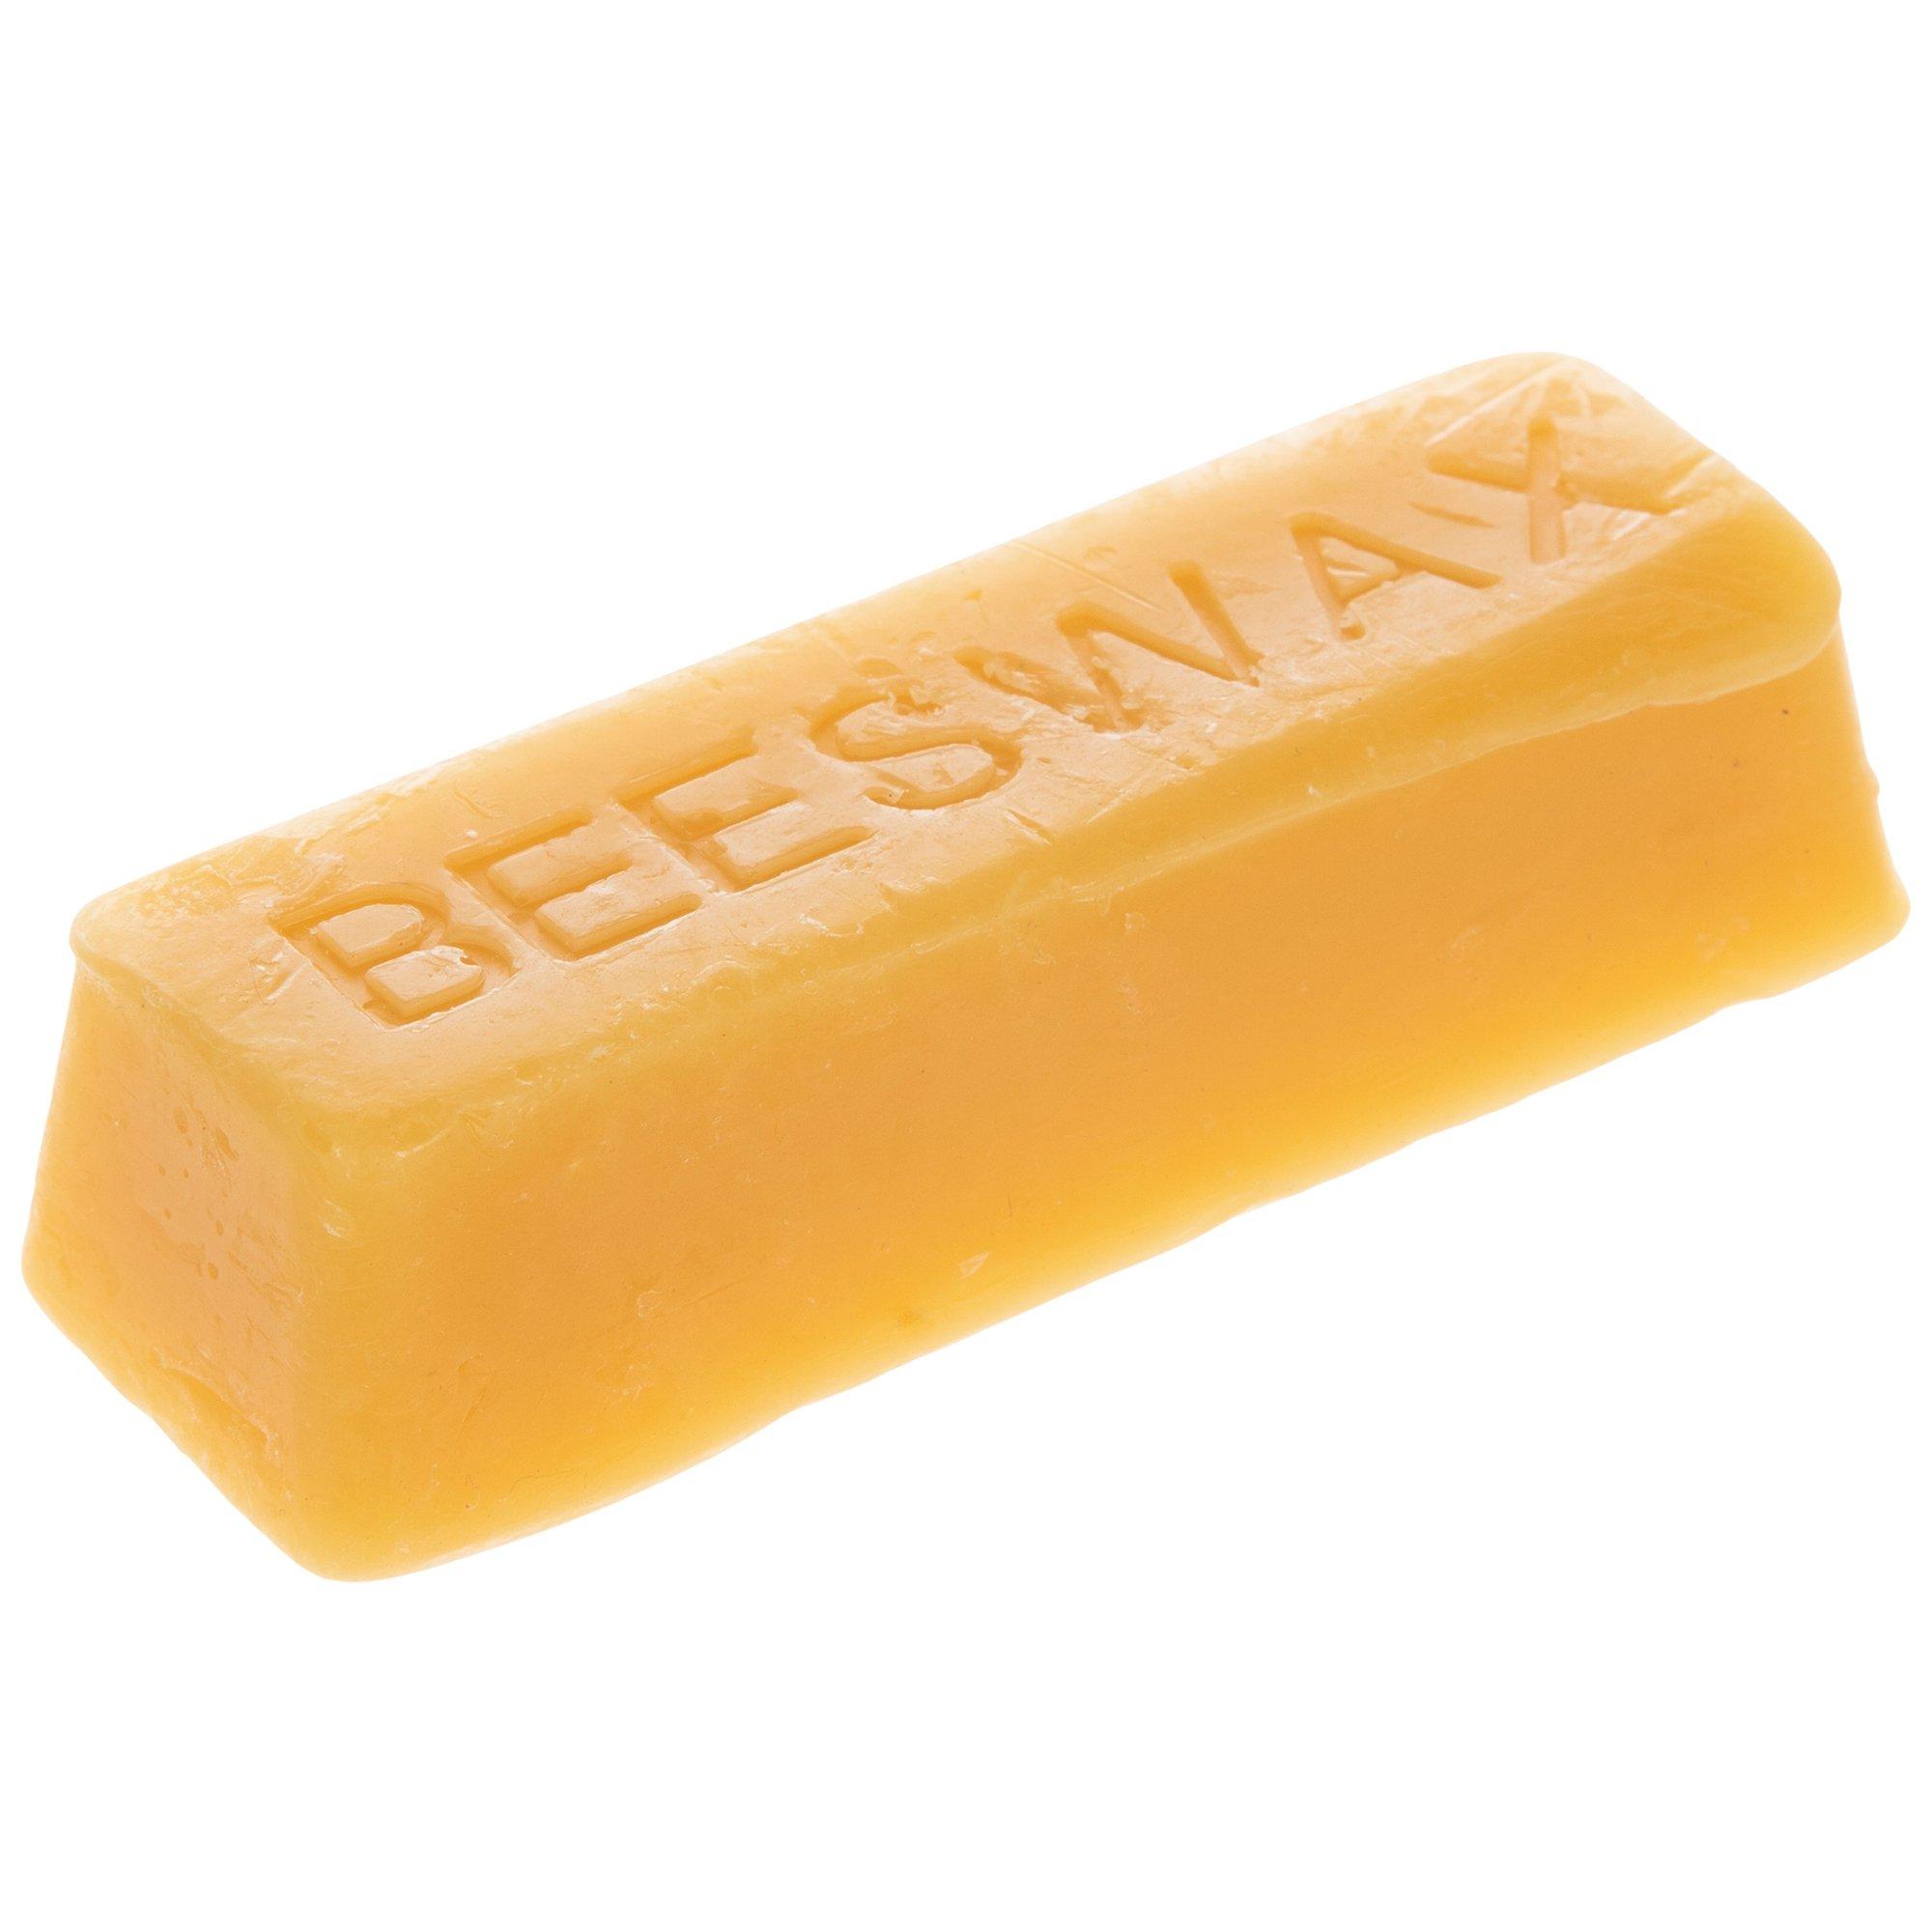 Beeswax in a 1 Ounce Bar for Waxing Thread or Leather, Thread Conditioner, Beeswax  for Sewing Thread, Beeswax for Beading Cord 